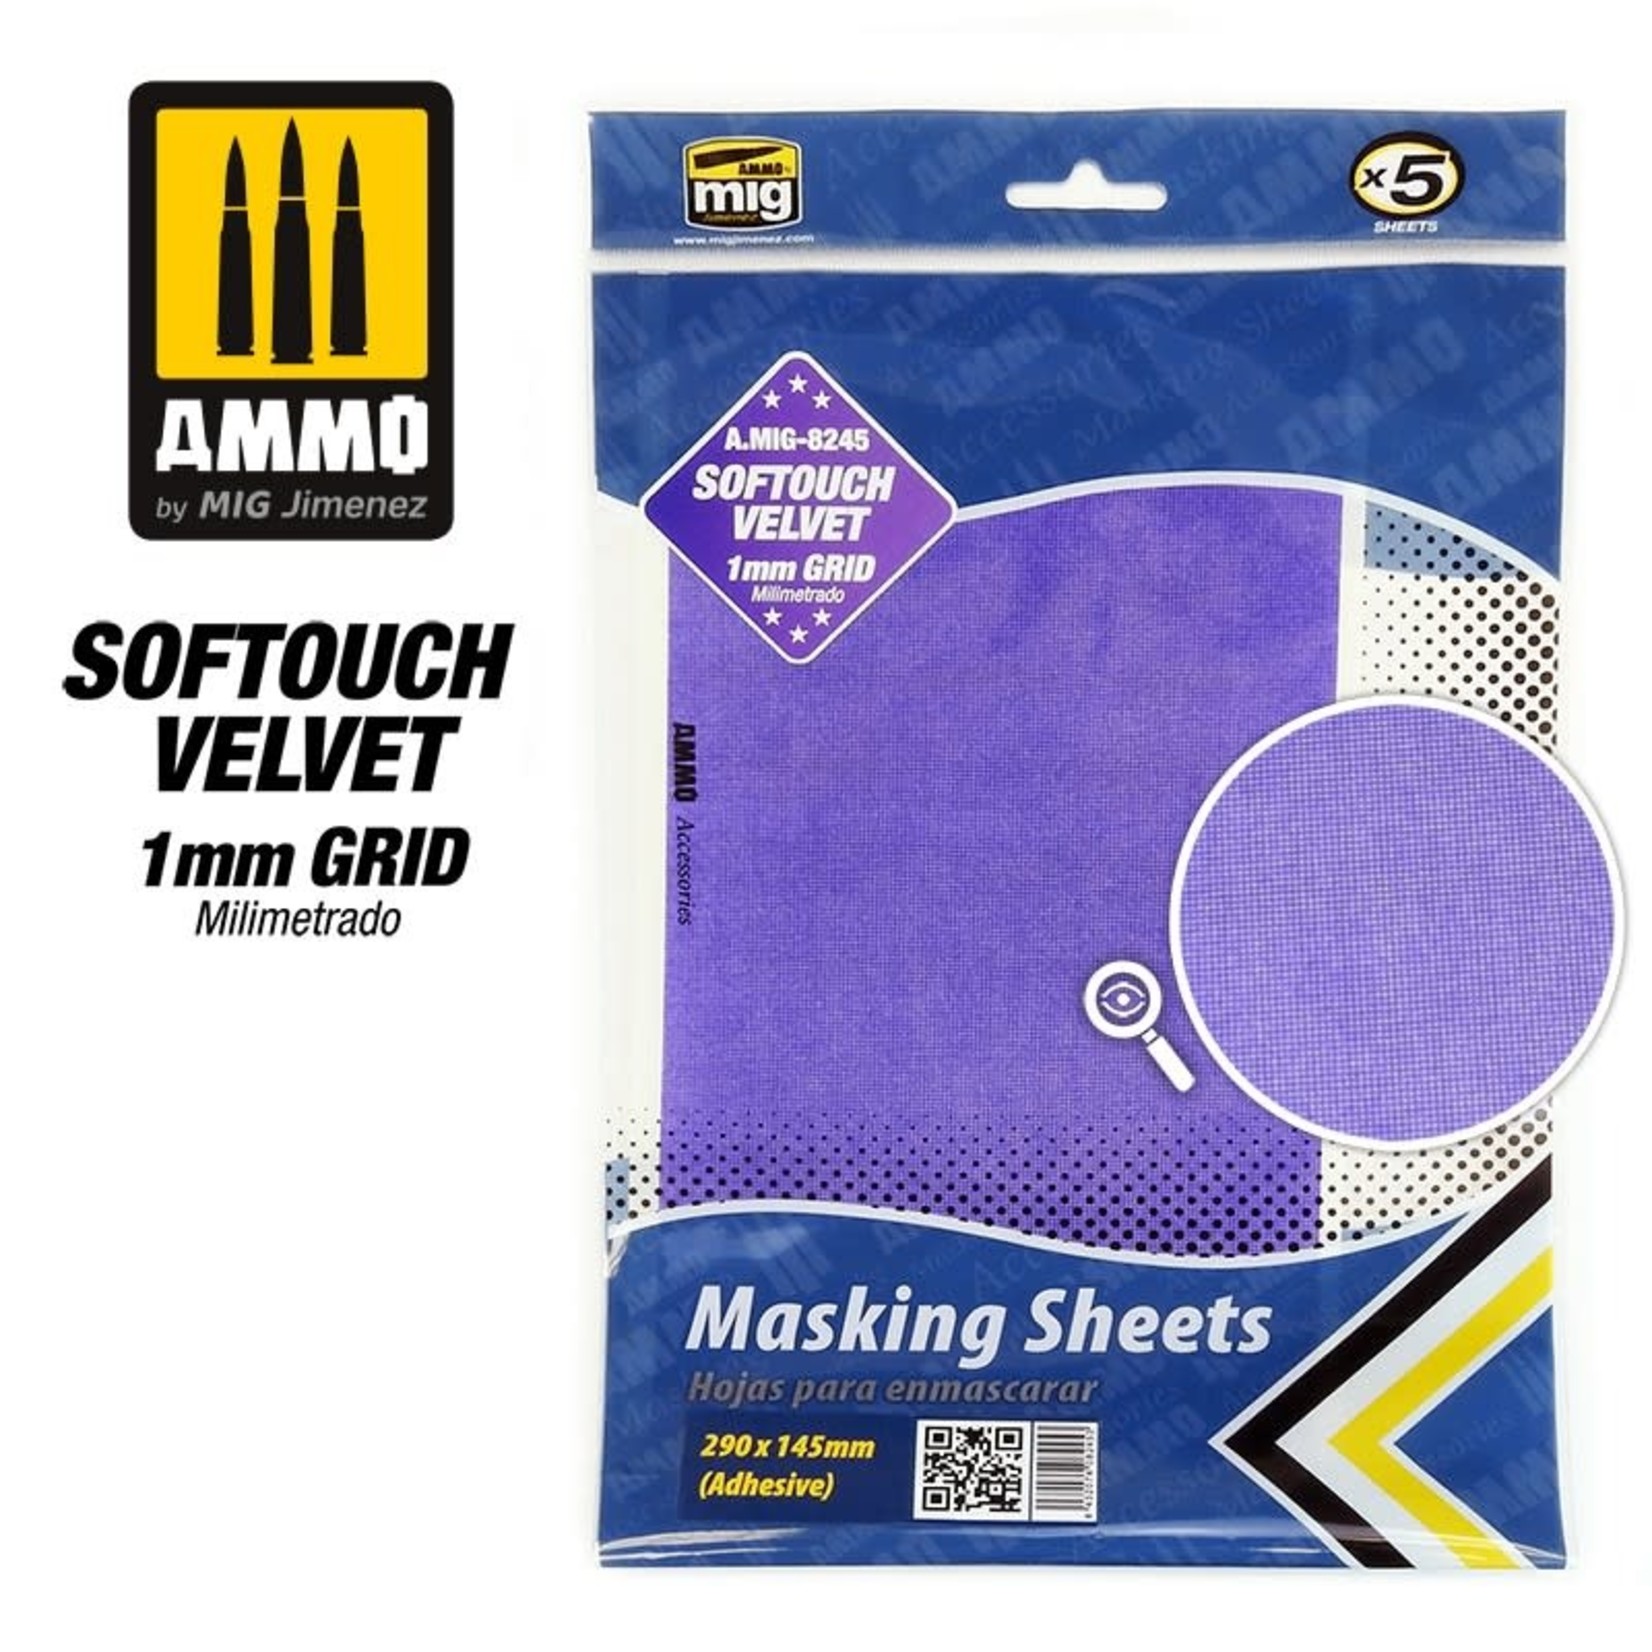 Ammo by Mig Jimenez A.MIG-8245 Softouch Velvet Adhesive Masking Sheets with 1mm Grid, 290mm x 145mm (5) set